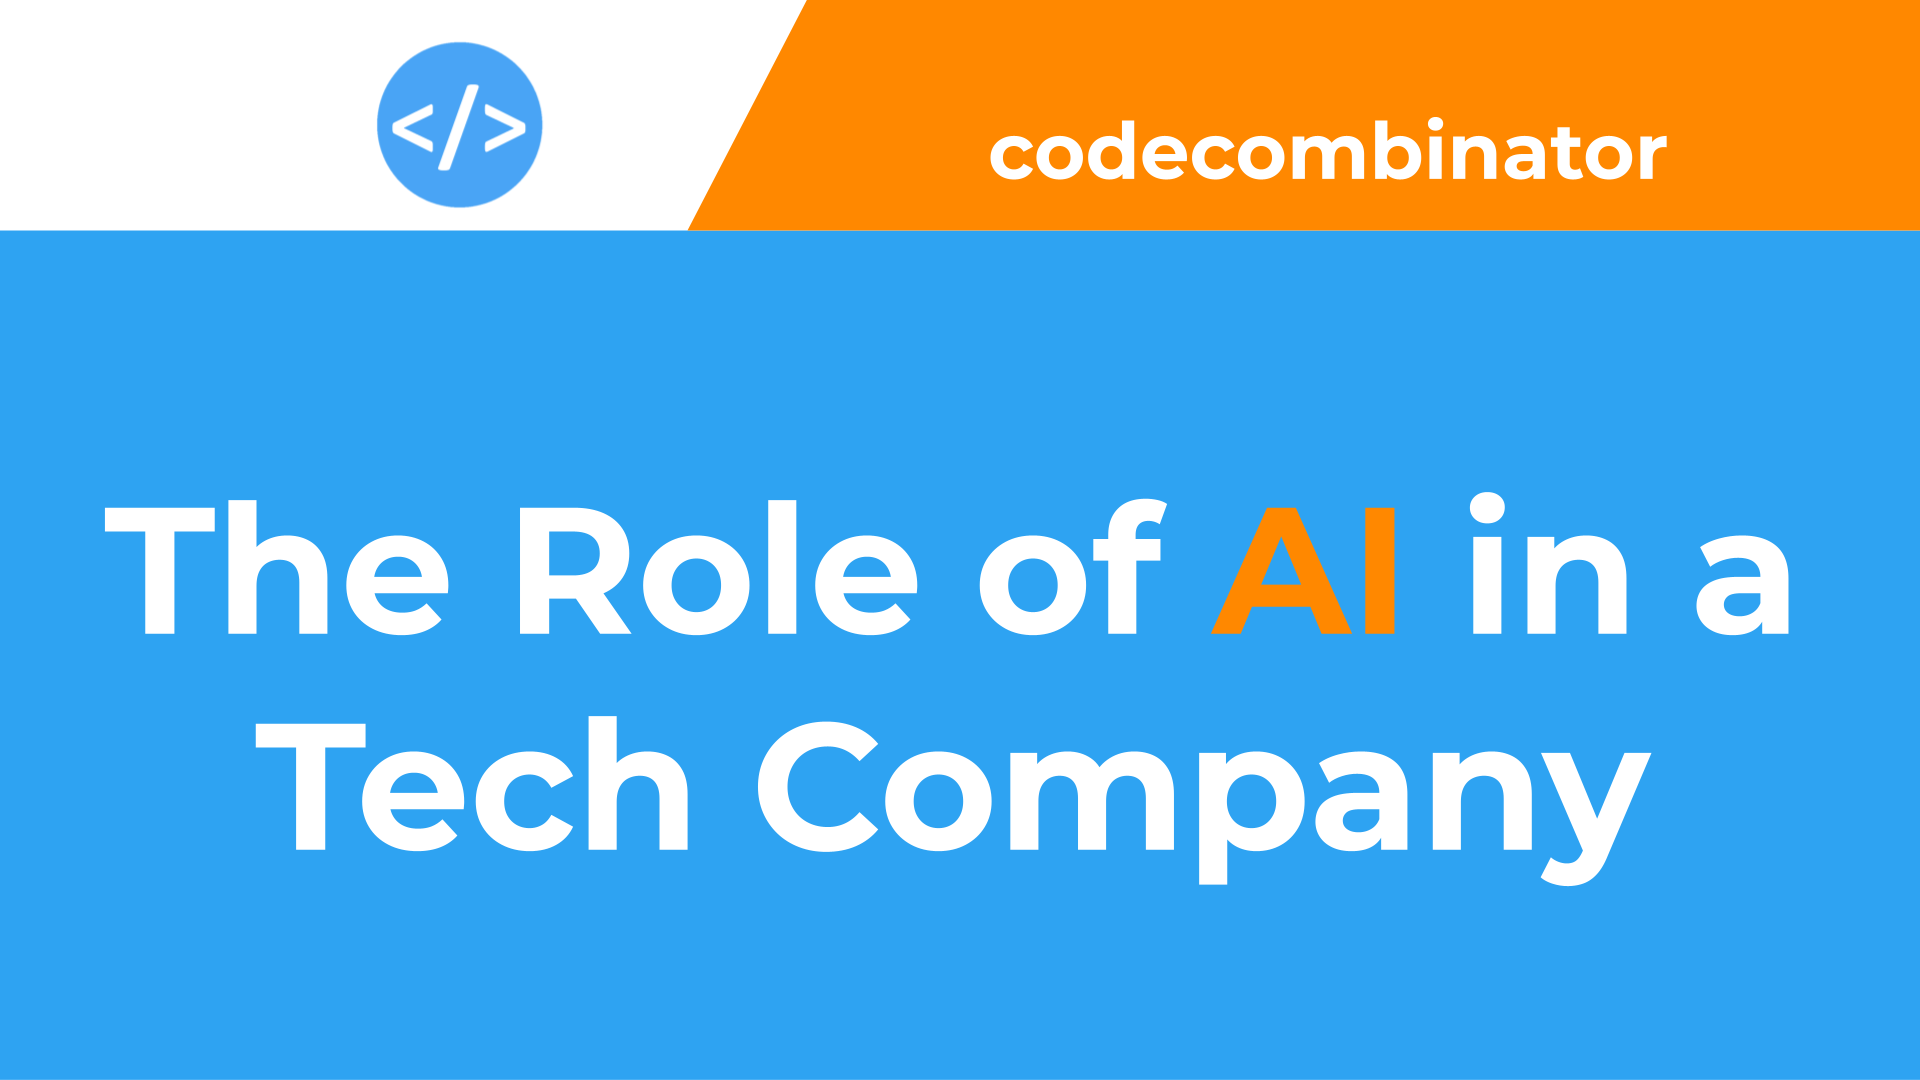 Featured Image for the blog post about the topic of: the role of AI in a tech company